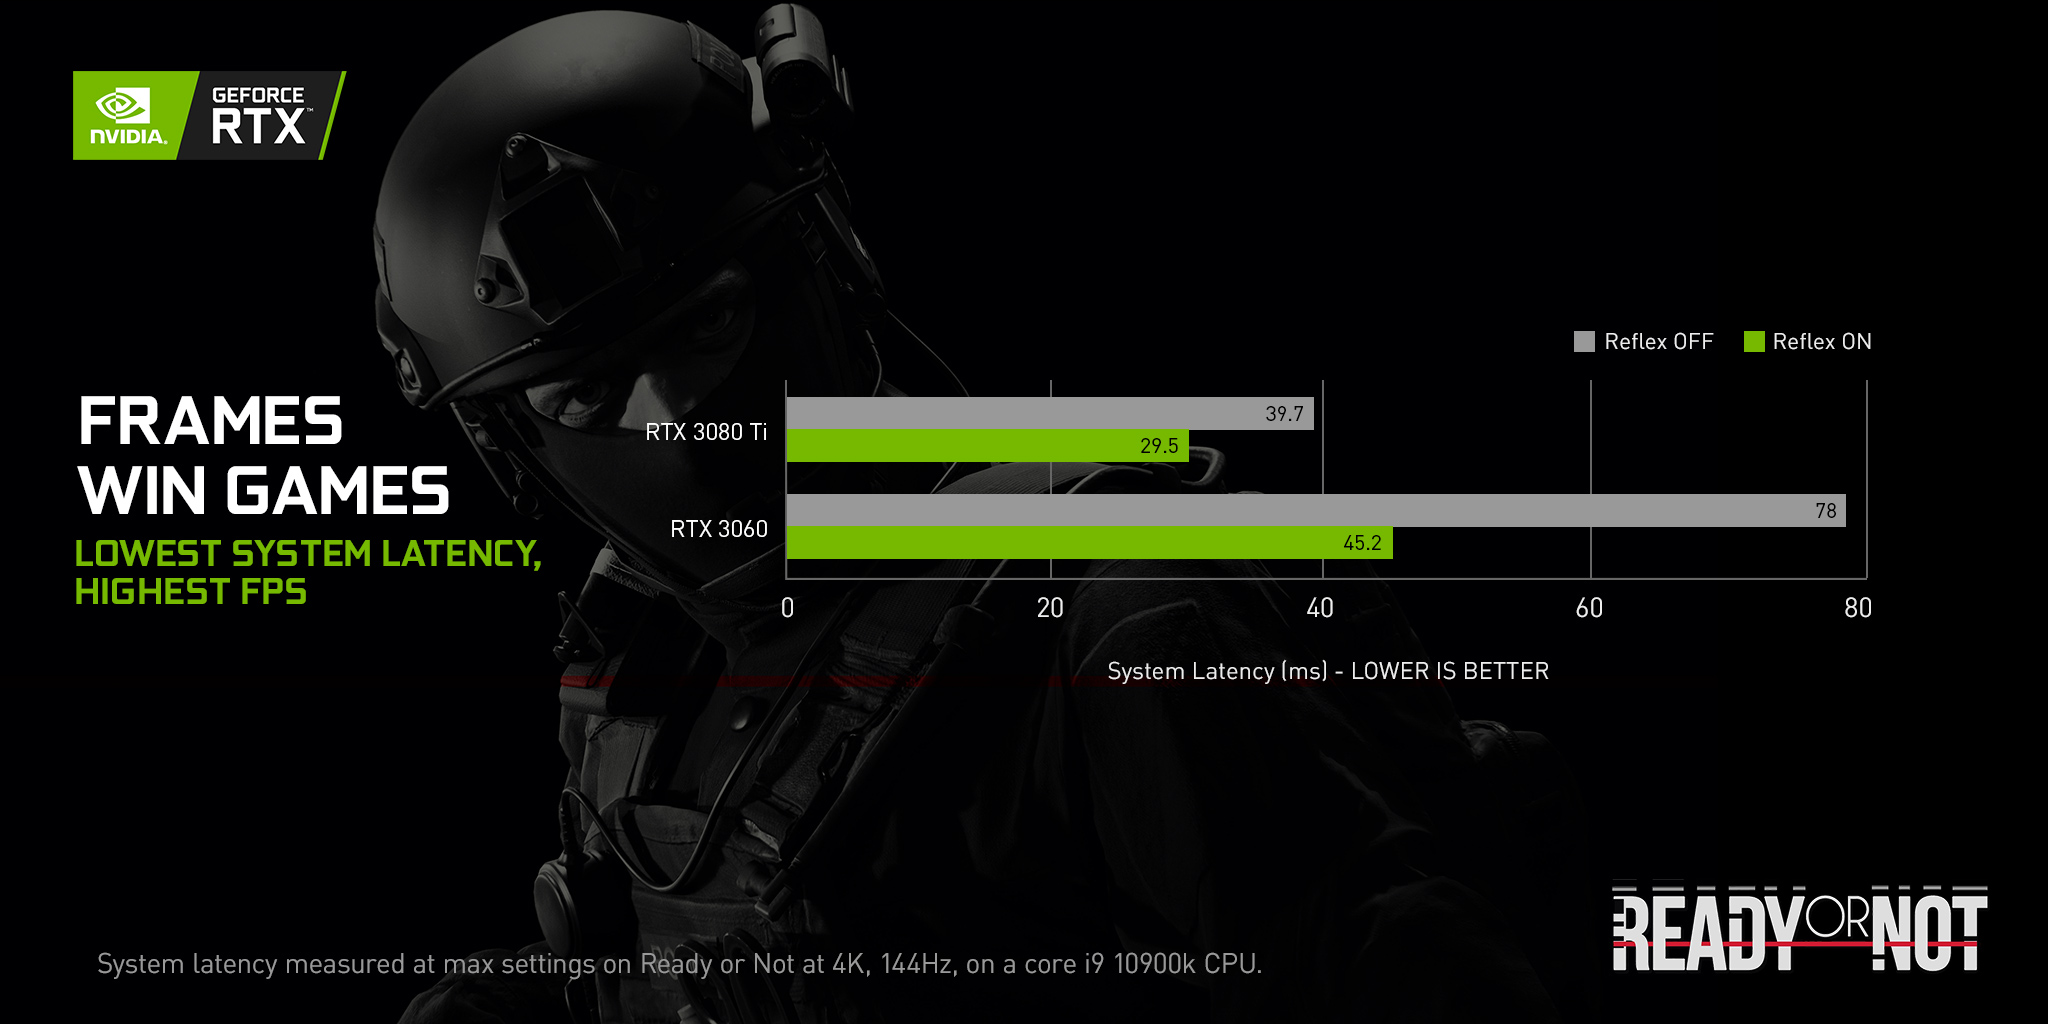 Introducing NVIDIA Reflex: Optimise and Measure Latency in Competitive Games, GeForce News